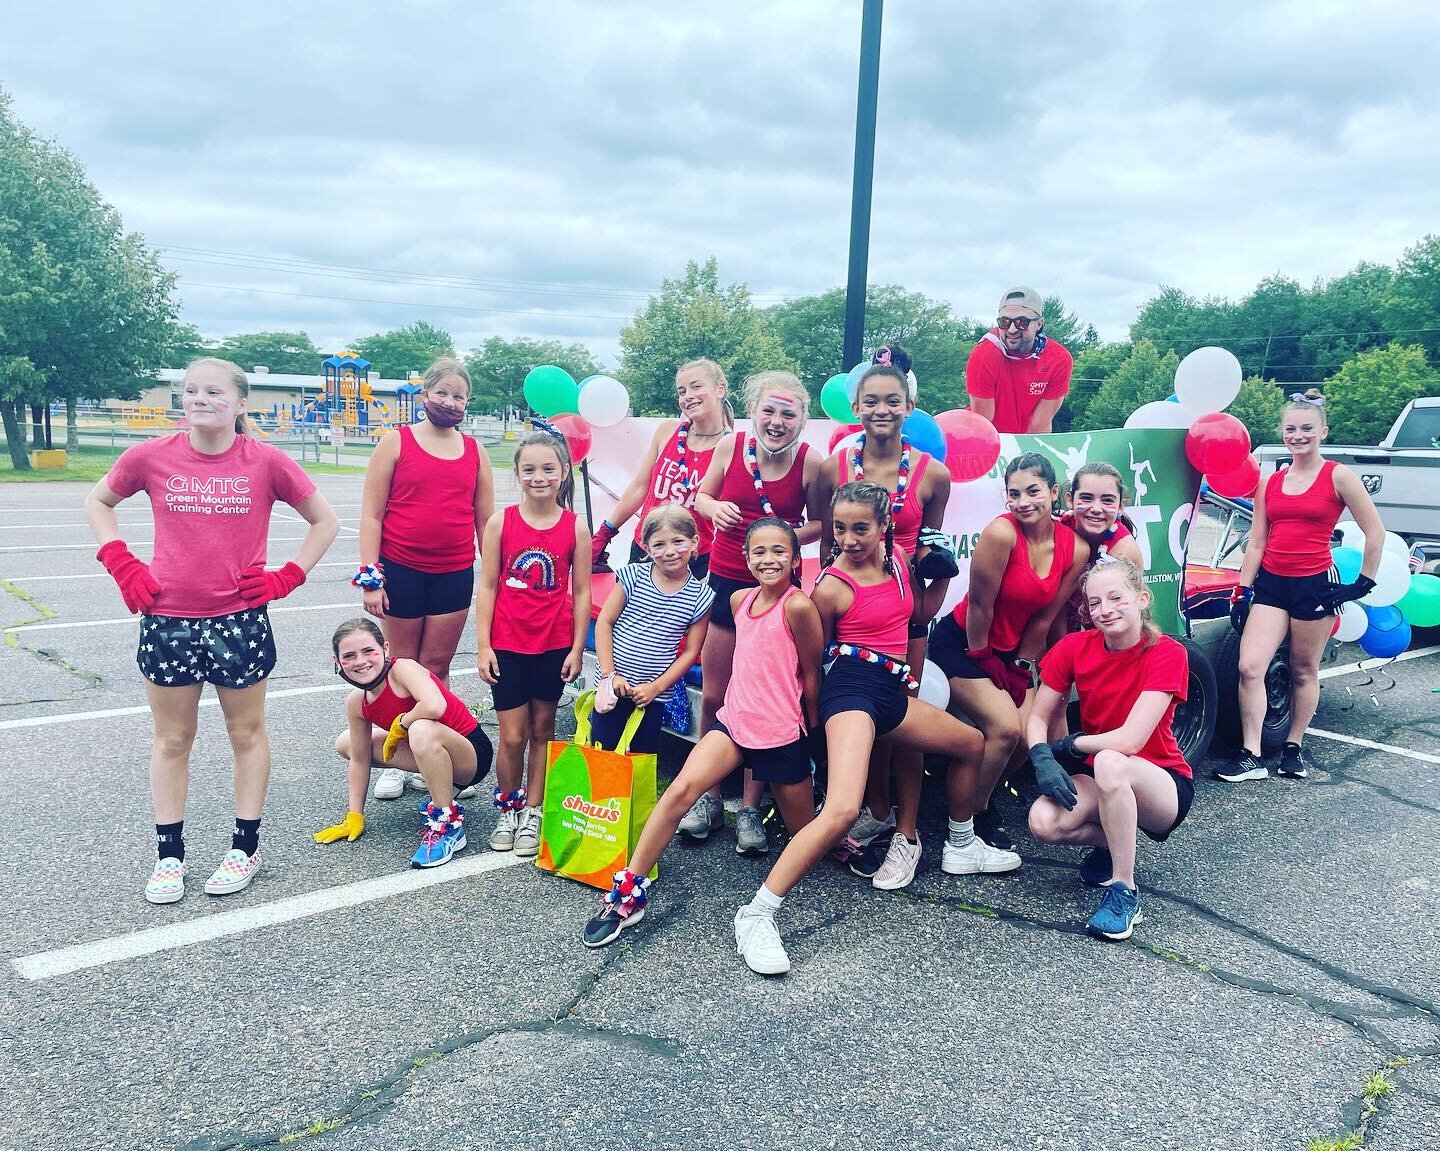 HAPPY 4TH!!!!!! GMTC took on the parade this year and we ROCKED it!!!!!!!